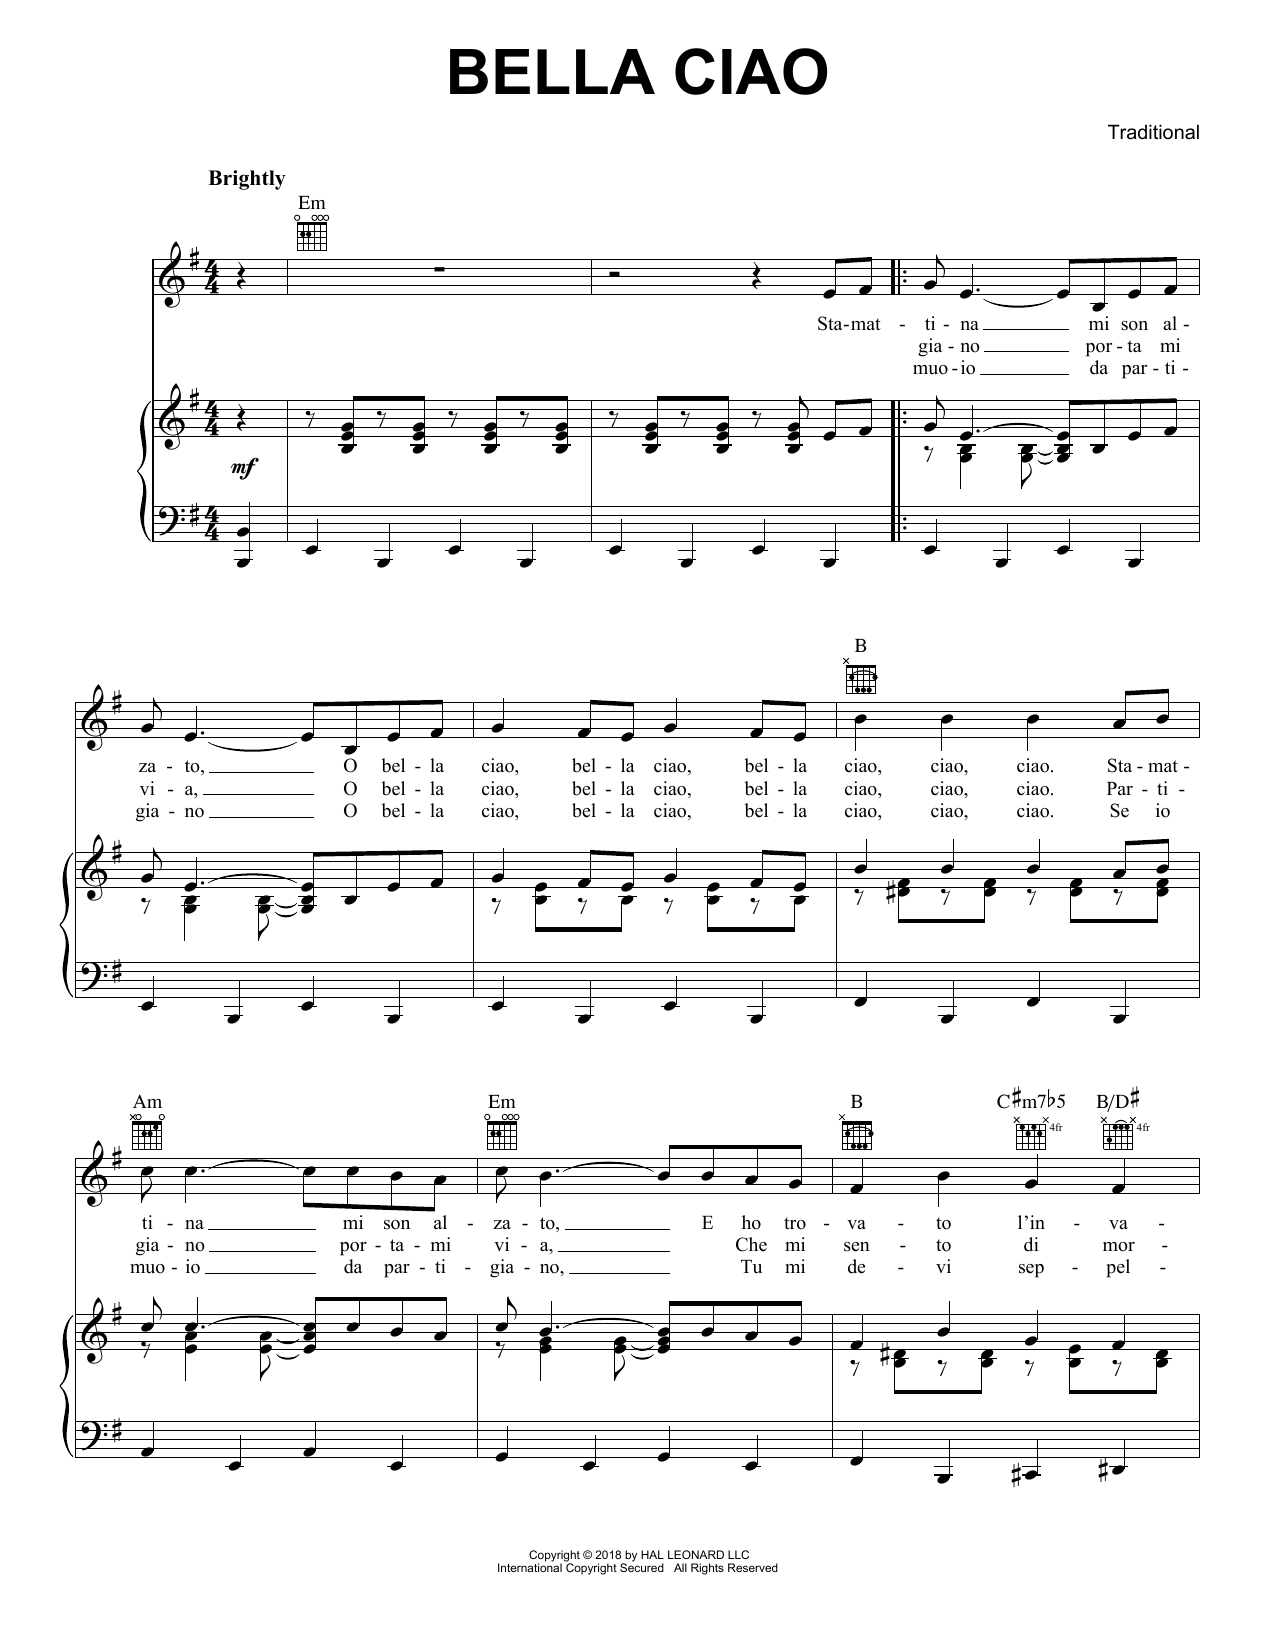 Download Traditional Bella Ciao Sheet Music